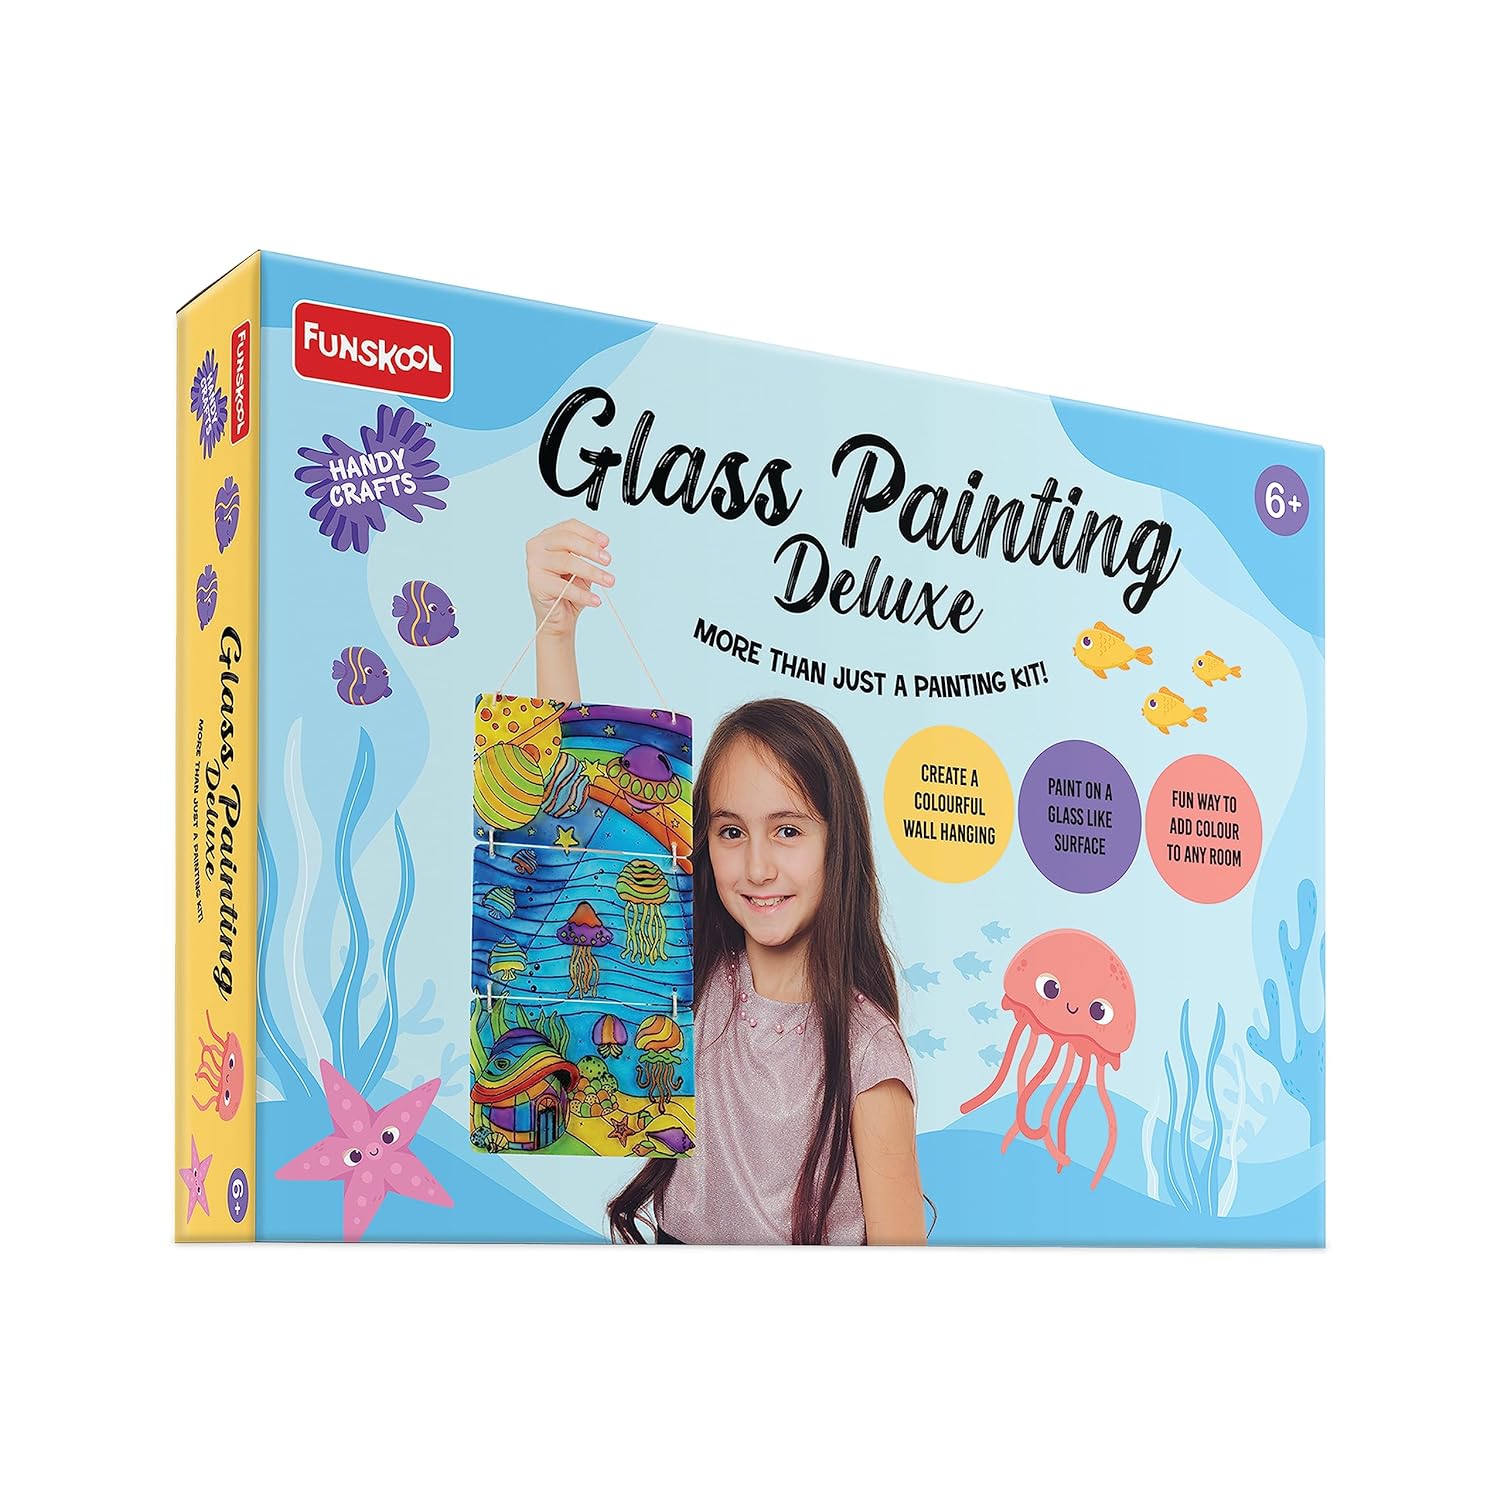 Funskool Handycrafts Glass Painting Deluxe Arts and Crafts Kit